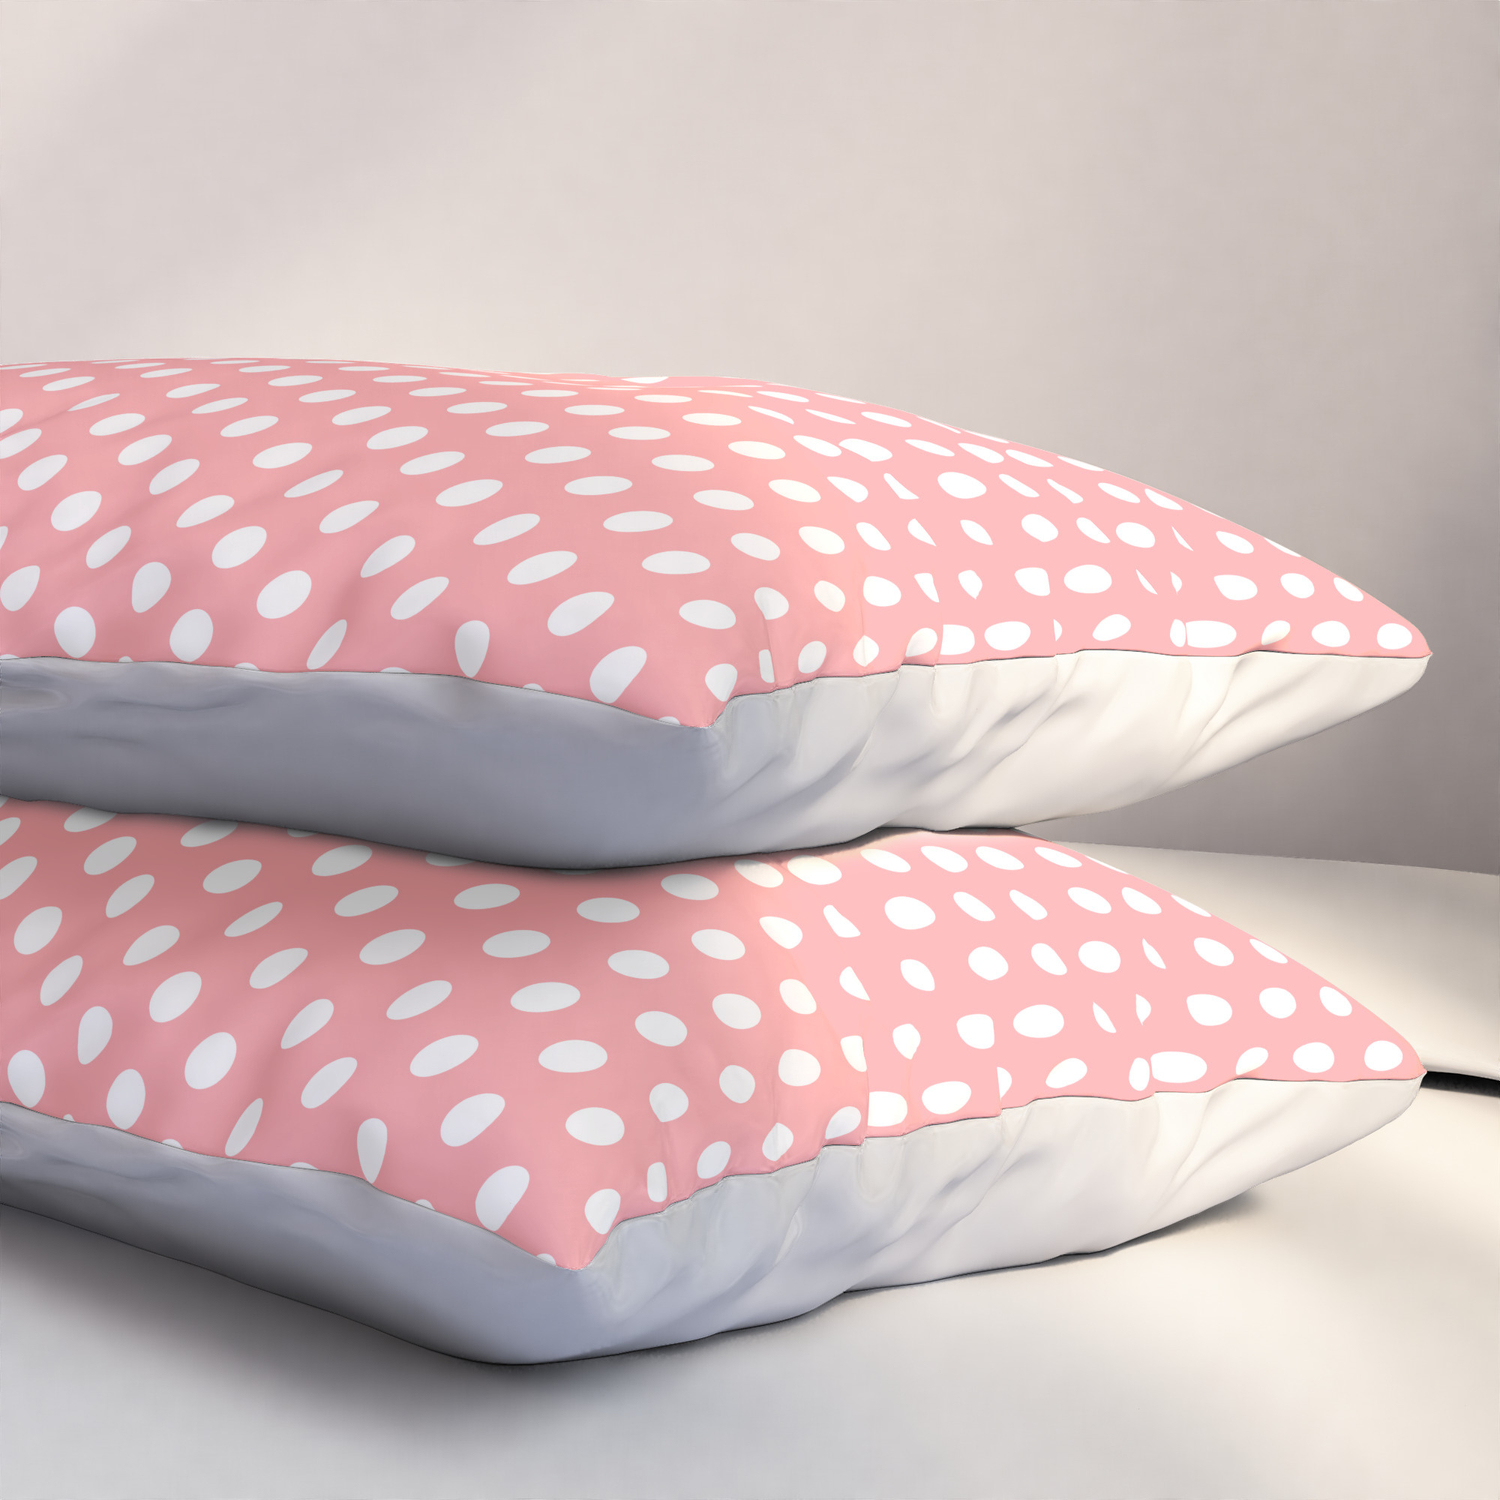 Society6 Pink & White Polka Dots by Christyne on Pillow Sham Cotton King Set of 2 